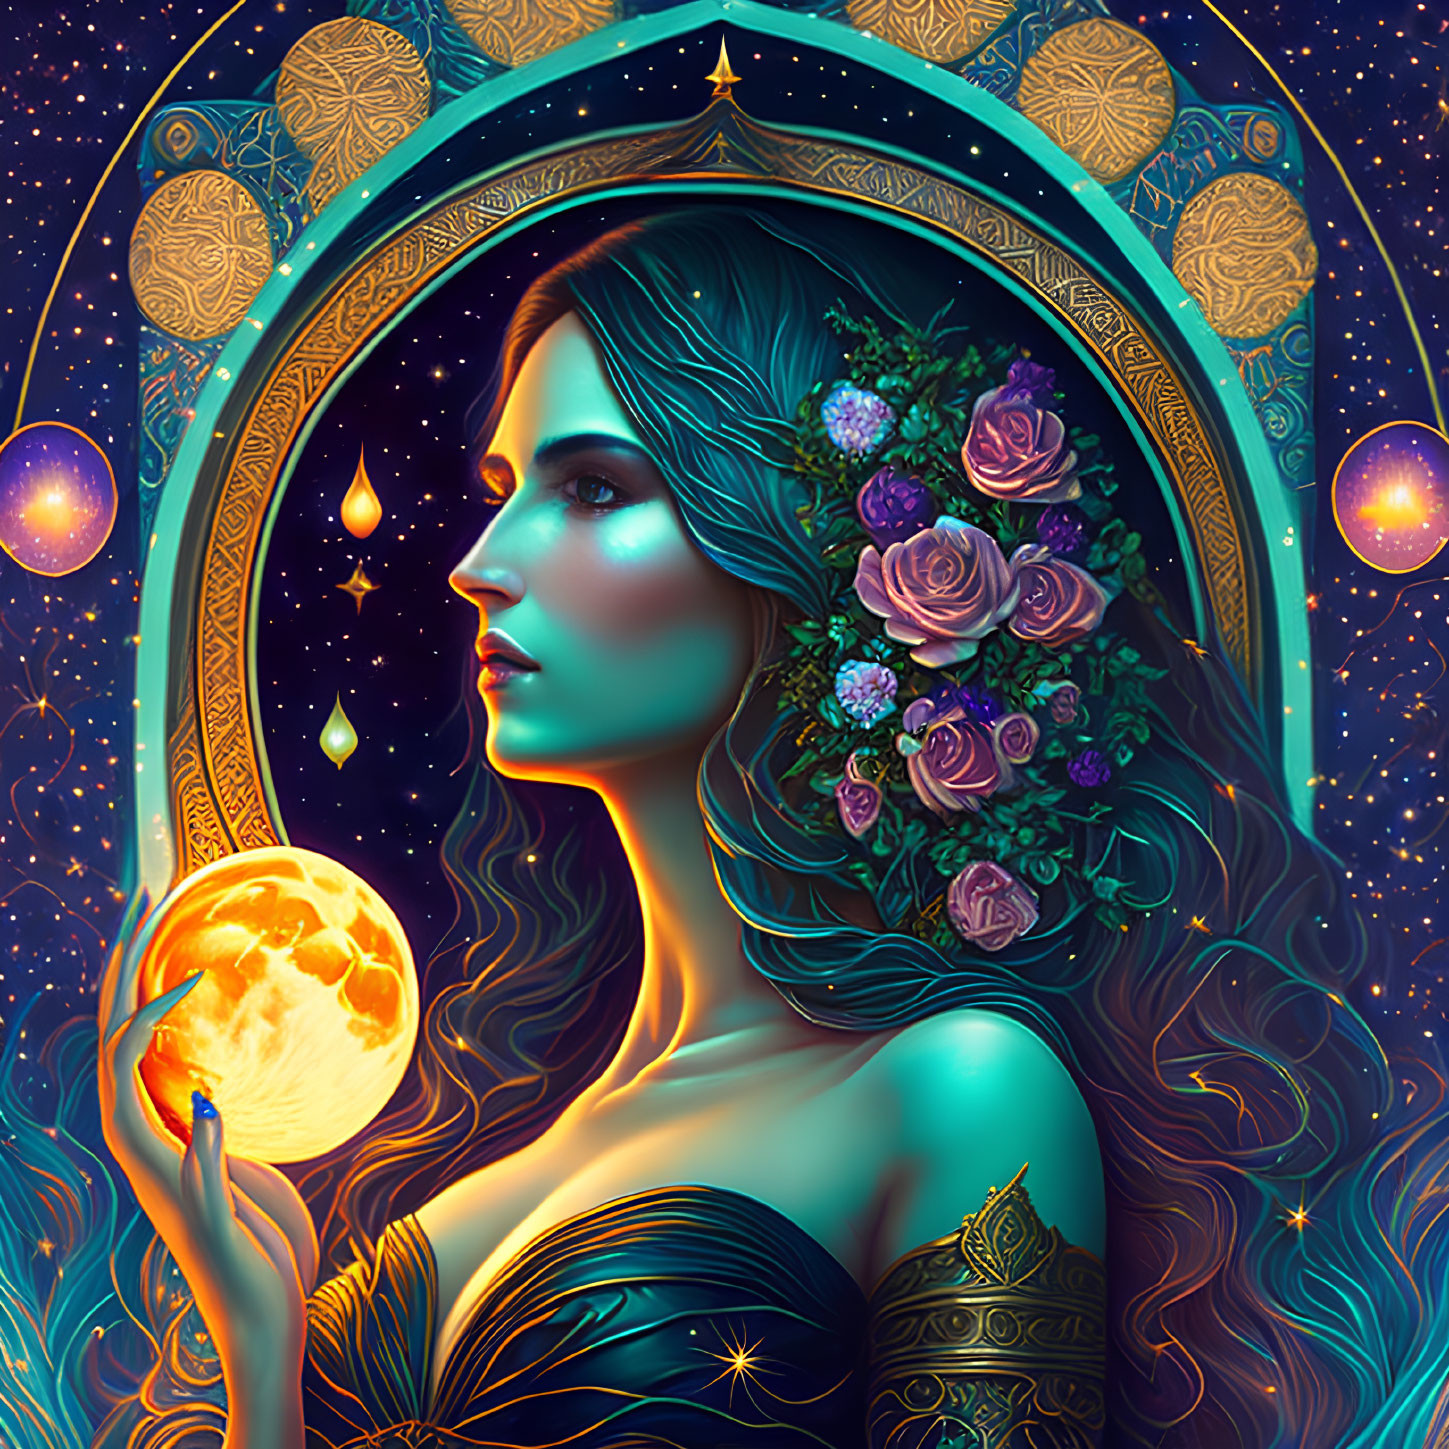 Mystical woman with moon, flowers, and stars on dark blue background